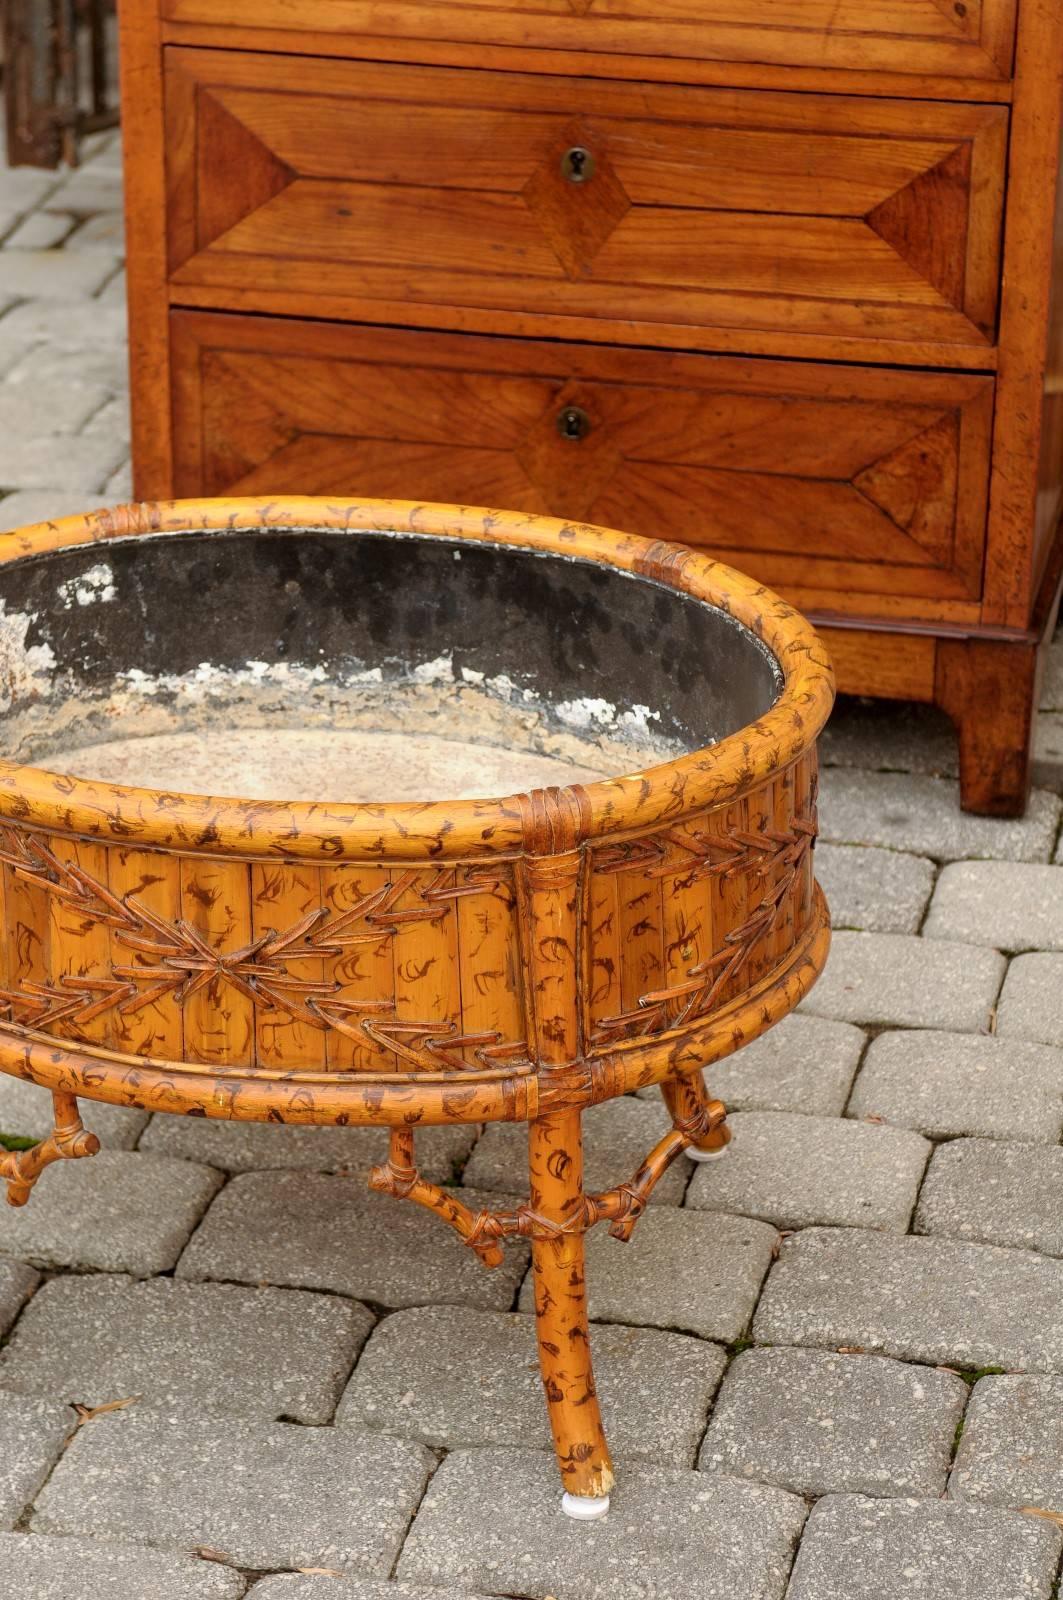 20th Century French Faux-Bamboo Round Turn of the Century Jardinière on Legs with Liner